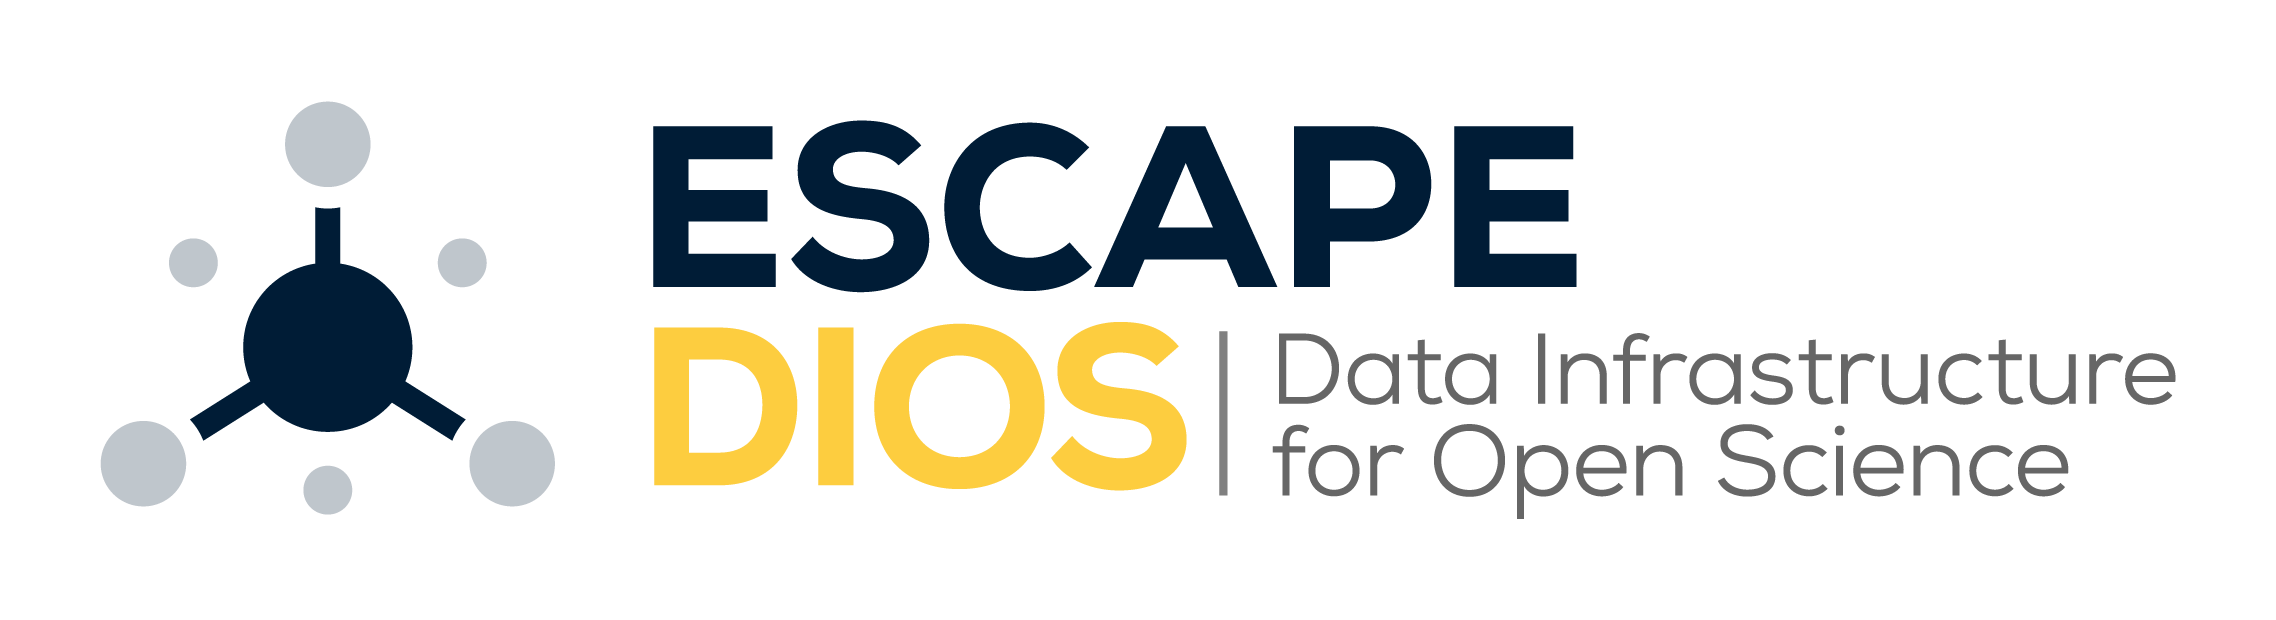 ESCAPE_DIOS  Data Infrastructure for Open Science